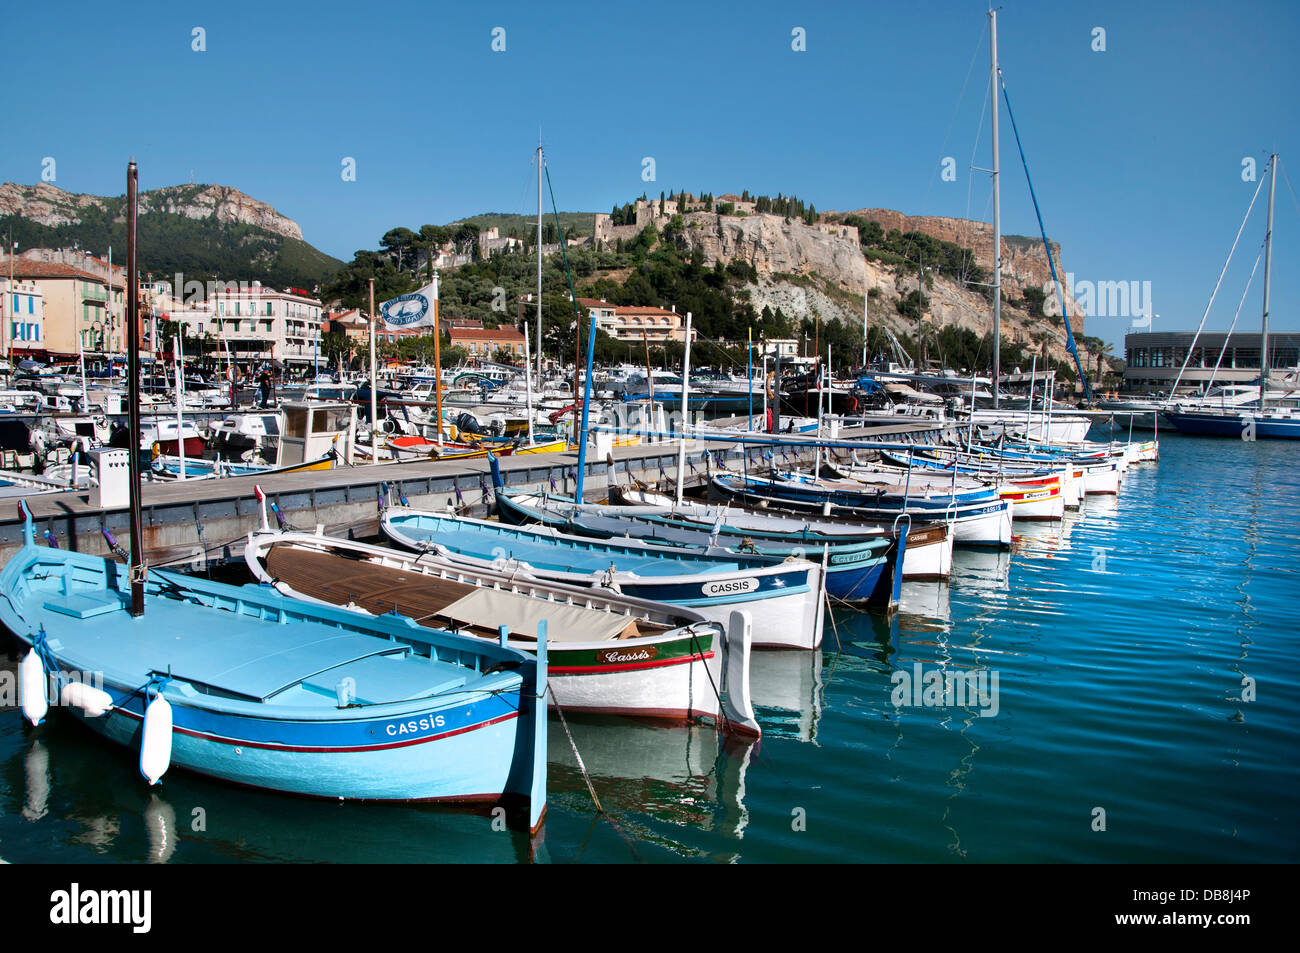 Cassis Old Vieux Port Harbour Provence French Riviera Cote D'Azur France  Mediterranean Stock Photo - Alamy